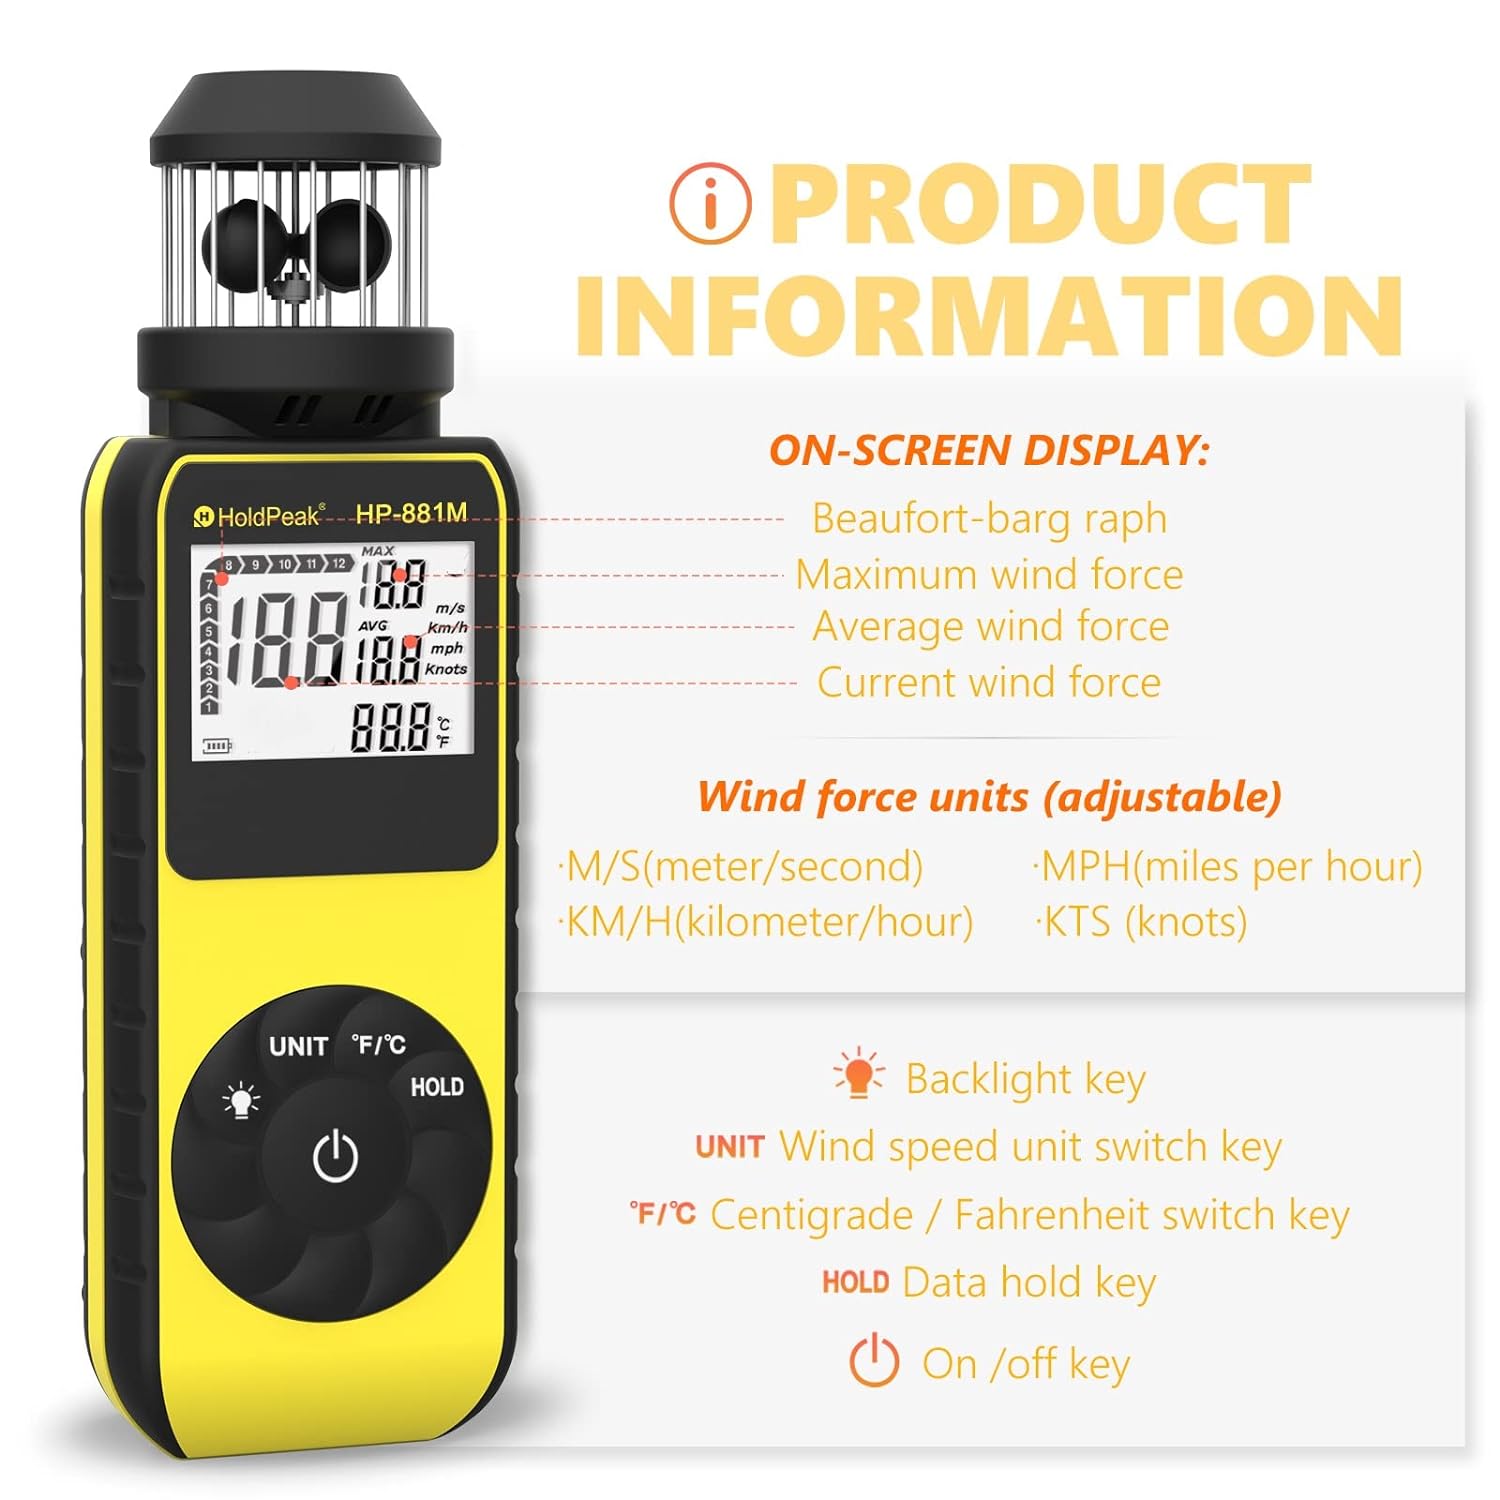 Digital Anemometer Handheld Wind Speed Meter, HOLDPEAK 881M Digital Cup Anemometer Wind Speed Gauge with Compass, LED Screen, Data Hold, 360° Outdoor Wind Velocity Measurement 0.7~42m/s, ℃/℉, Yellow